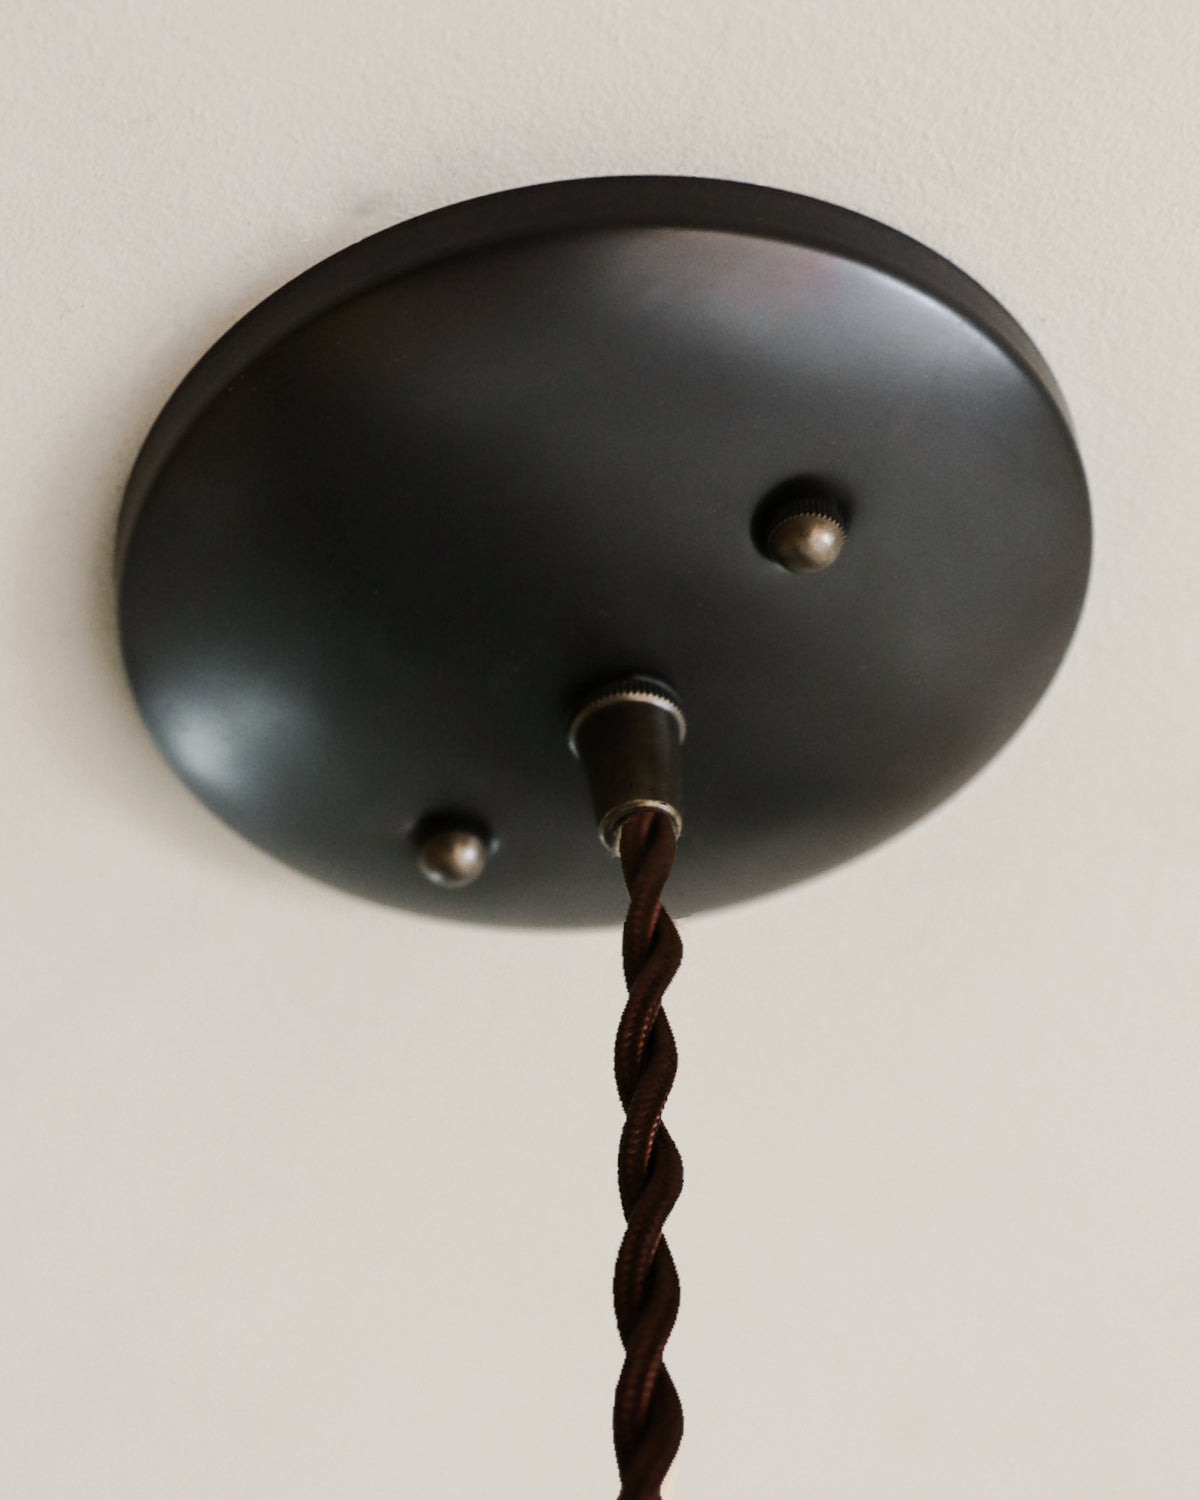 Pendant light with large clear glass globe and decorative wooden black walnut shade. Hardwired or plug light fixture. Made by Lostine in Philadelphia. Simple interior design, made in the USA. Warm American Modern Design